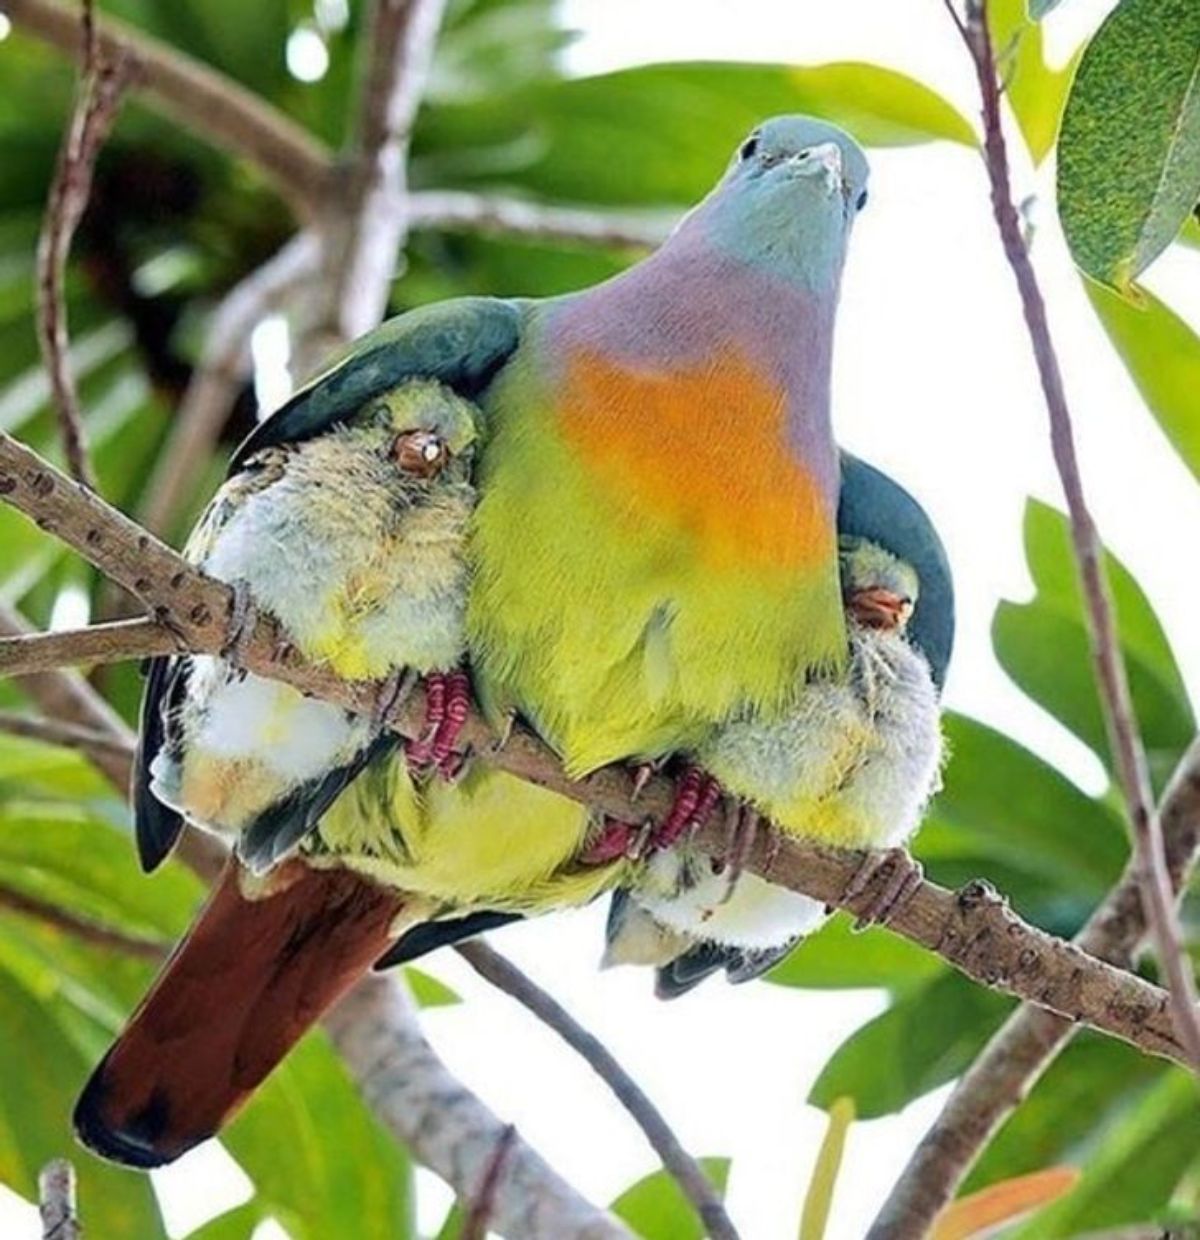 multi-coloured bird holding 2 baby birds under the wings on either side